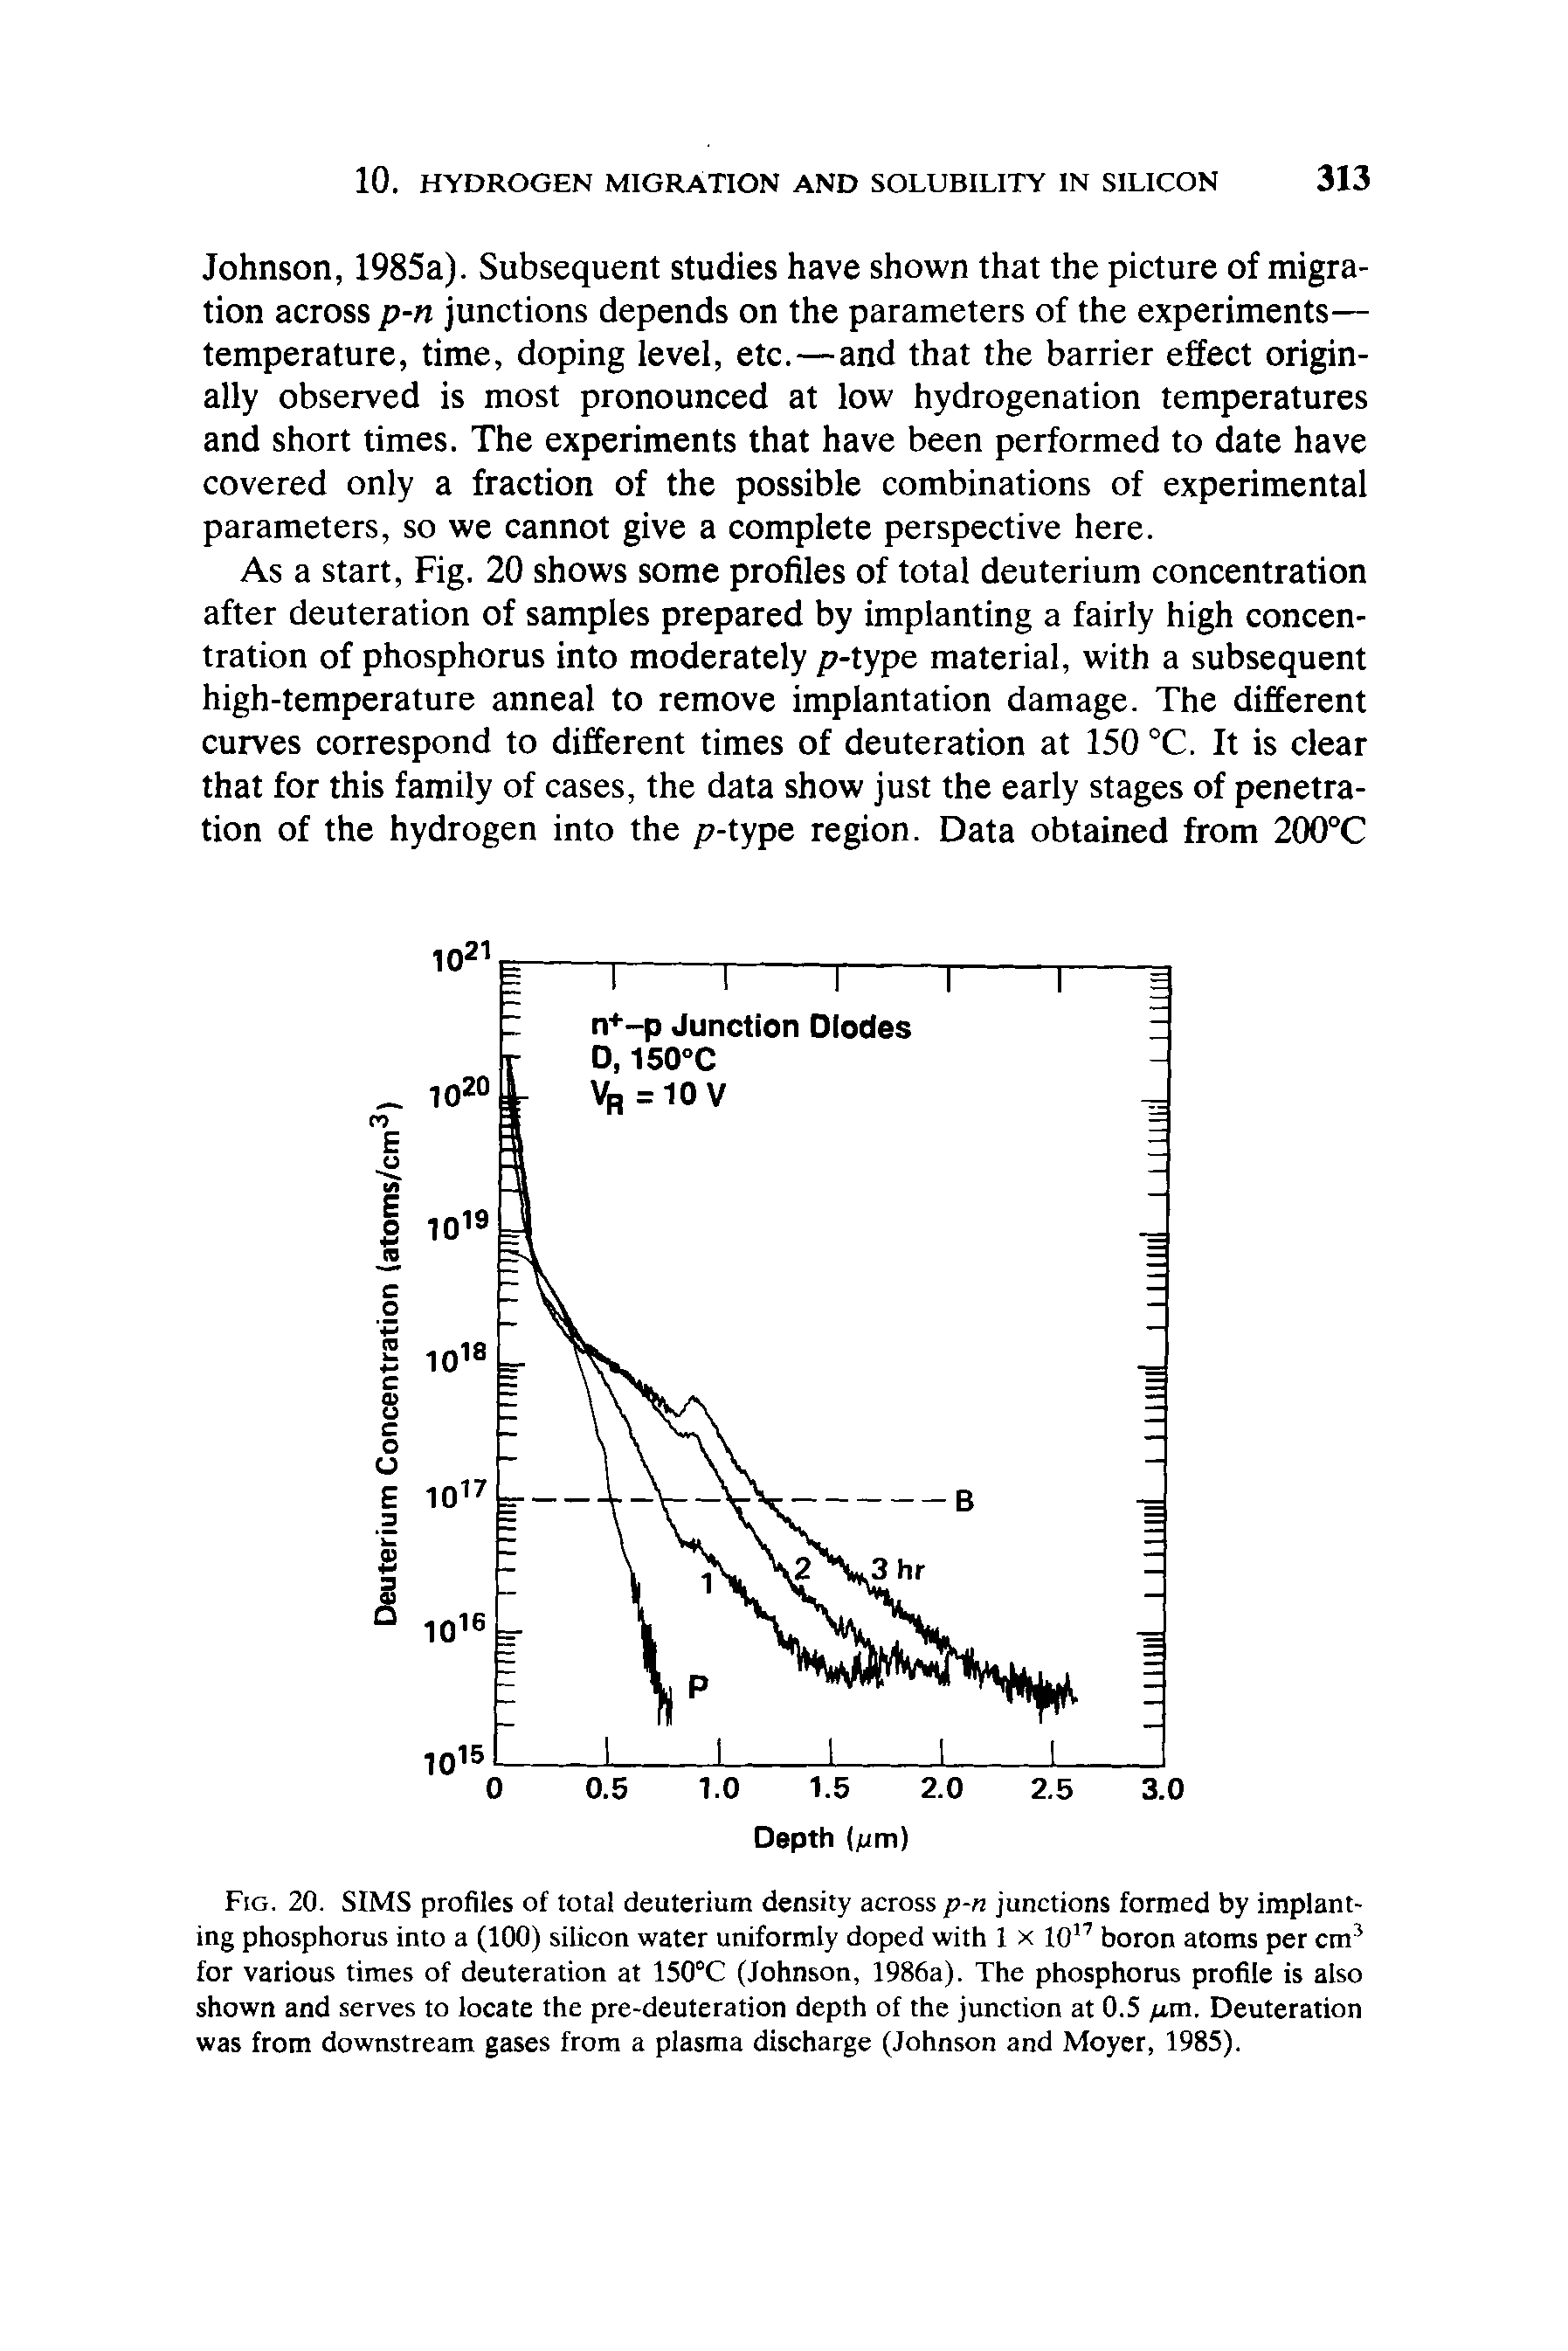 Fig. 20. SIMS profiles of total deuterium density across p-n junctions formed by implanting phosphorus into a (100) silicon water uniformly doped with 1 x 1017 boron atoms per cm3 for various times of deuteration at 150°C (Johnson, 1986a). The phosphorus profile is also shown and serves to locate the pre-deuteration depth of the junction at 0.5 Deuteration was from downstream gases from a plasma discharge (Johnson and Moyer, 1985).